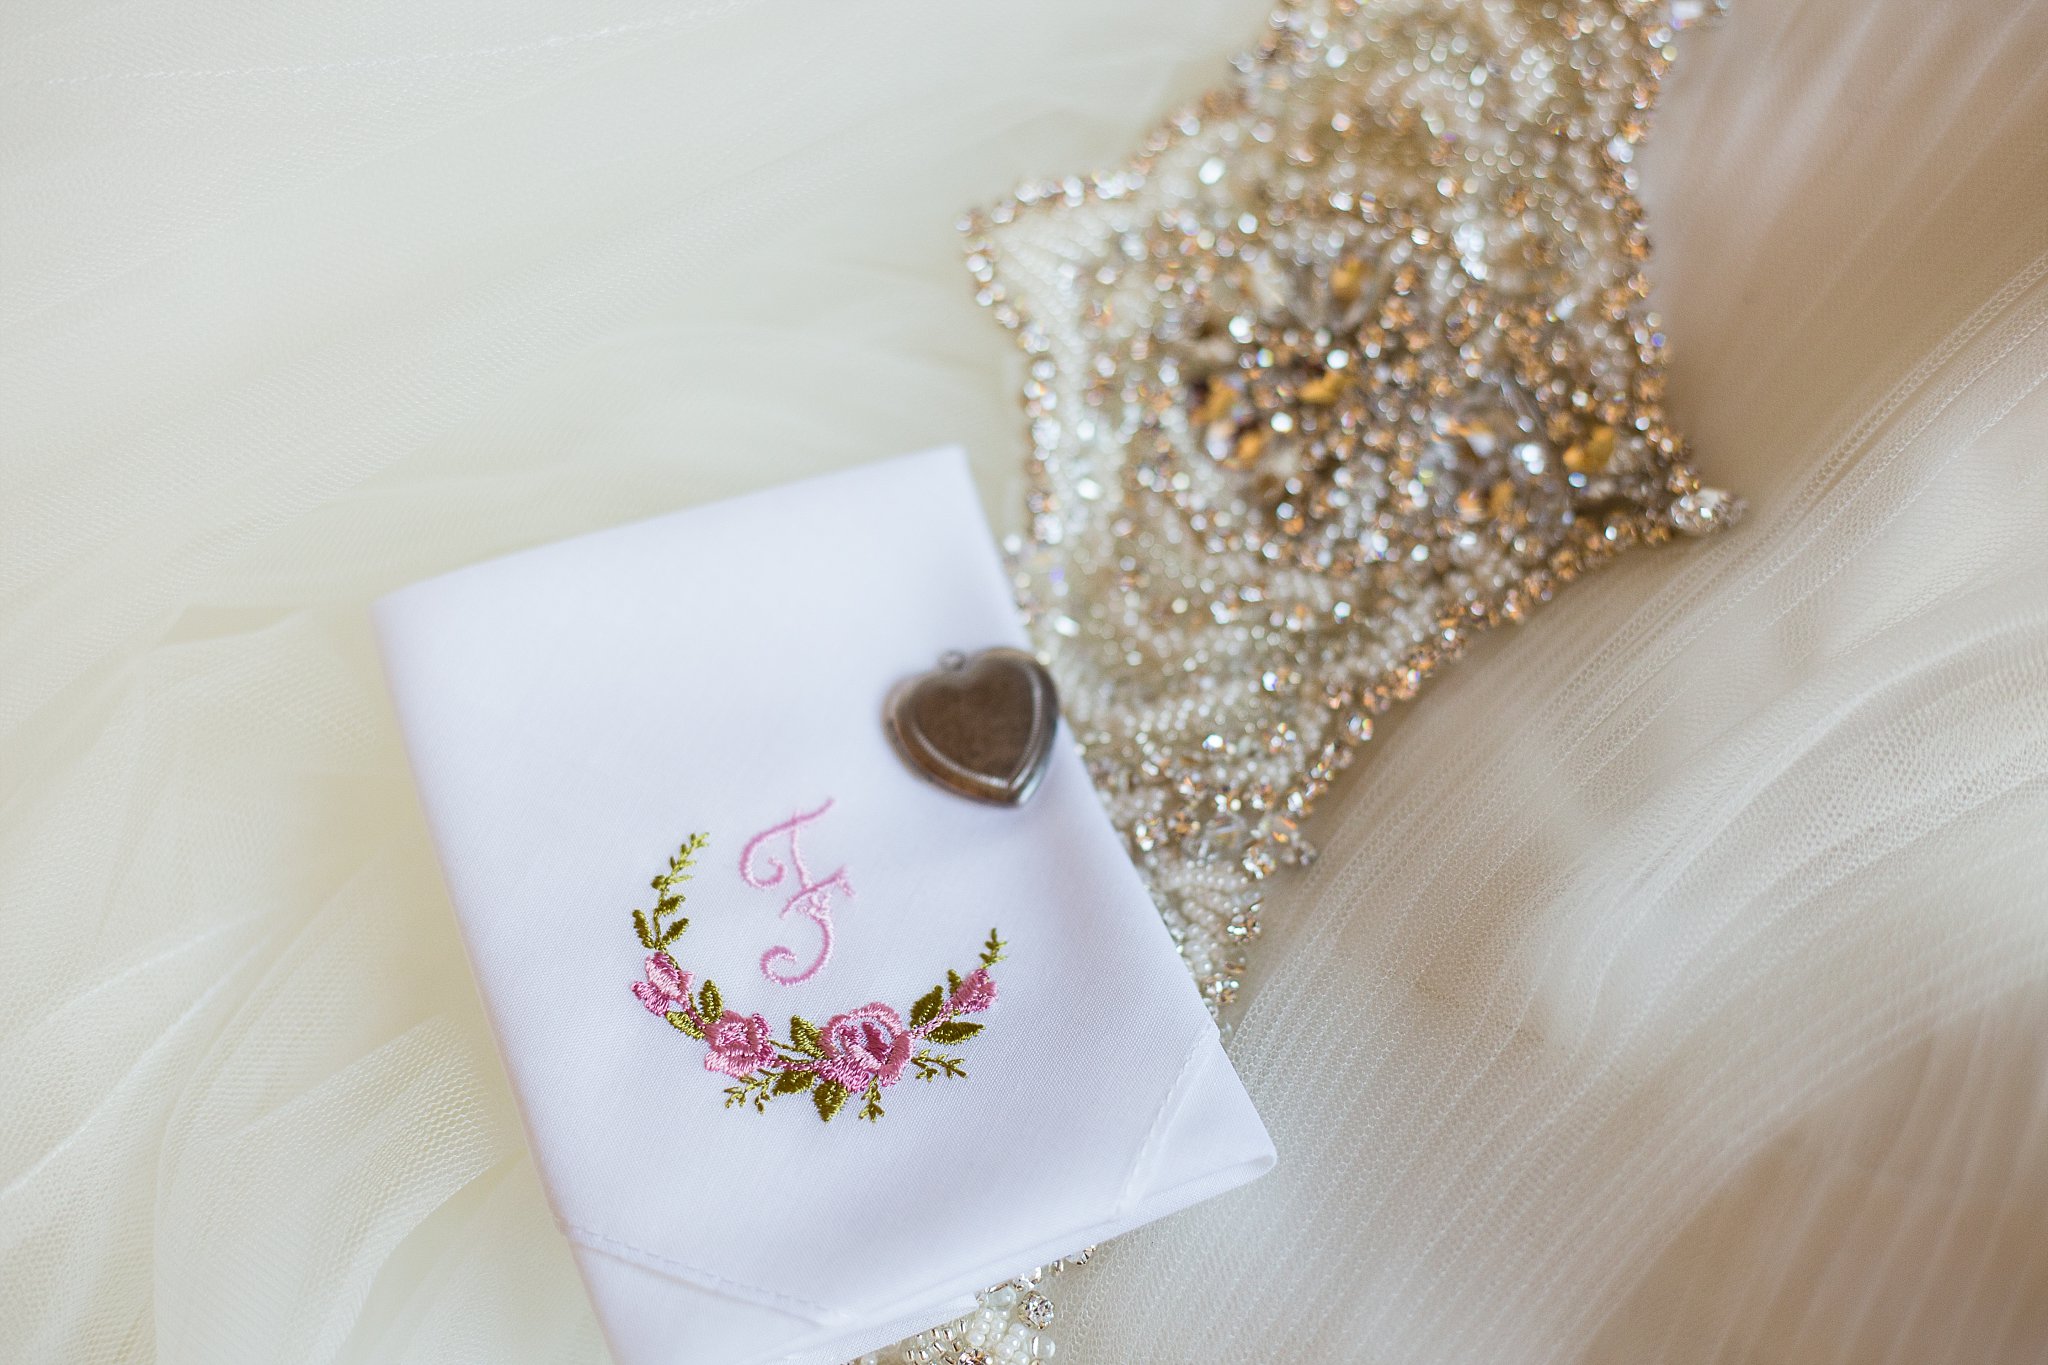 Bride's heirloom handkerchief that she carried on her wedding day by PMA Photography.